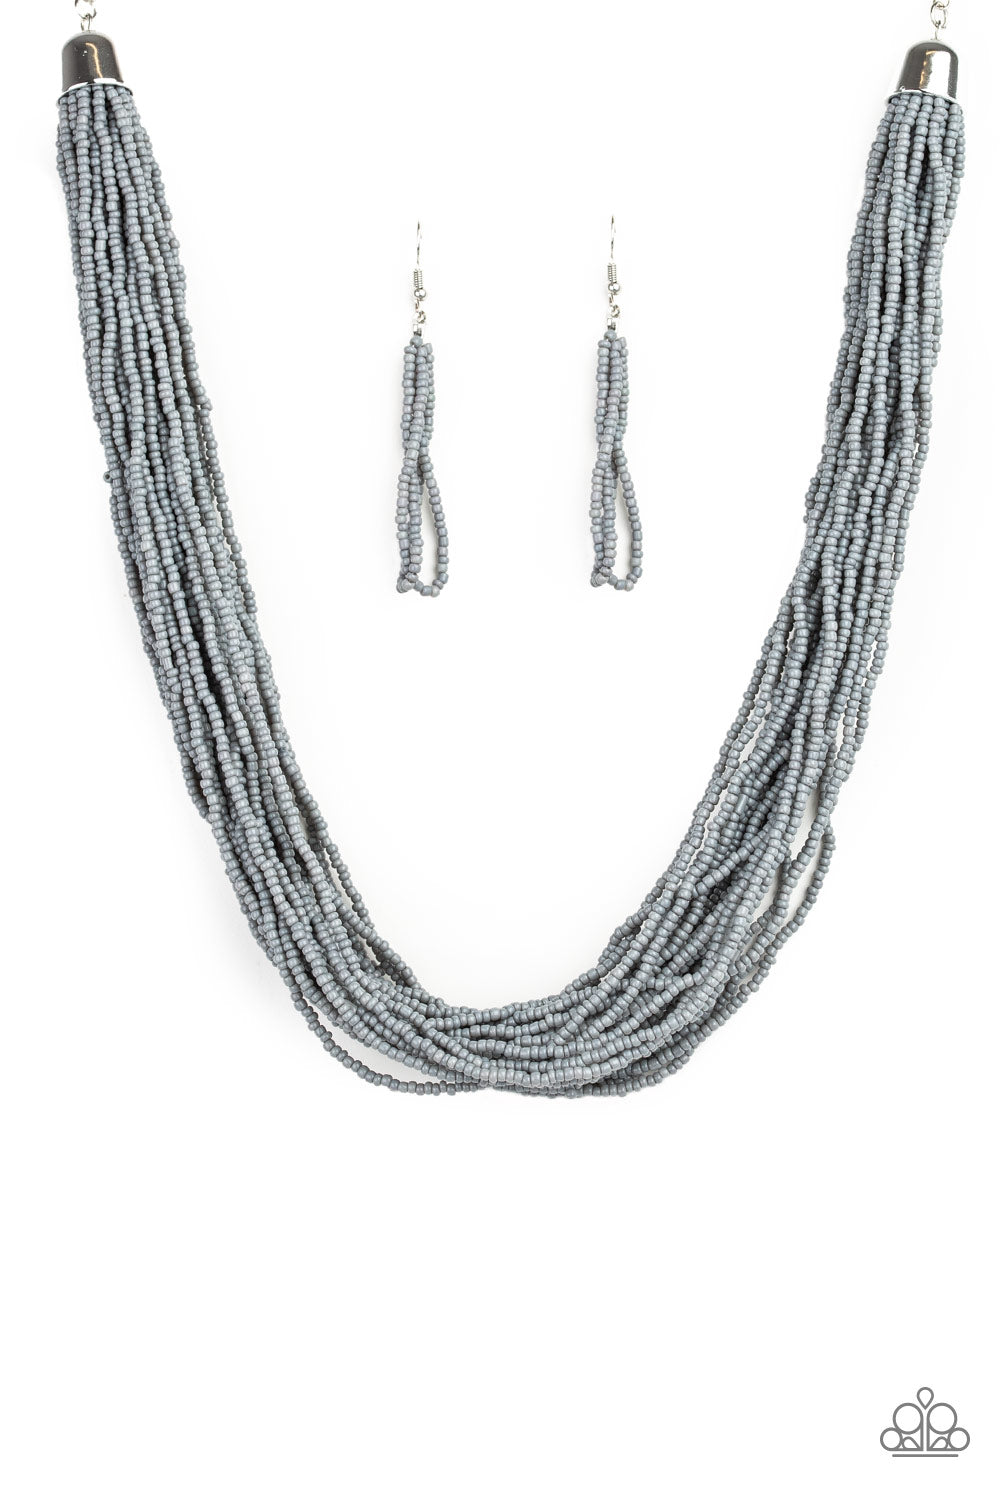 The Show Must CONGO On! Silver-Necklace